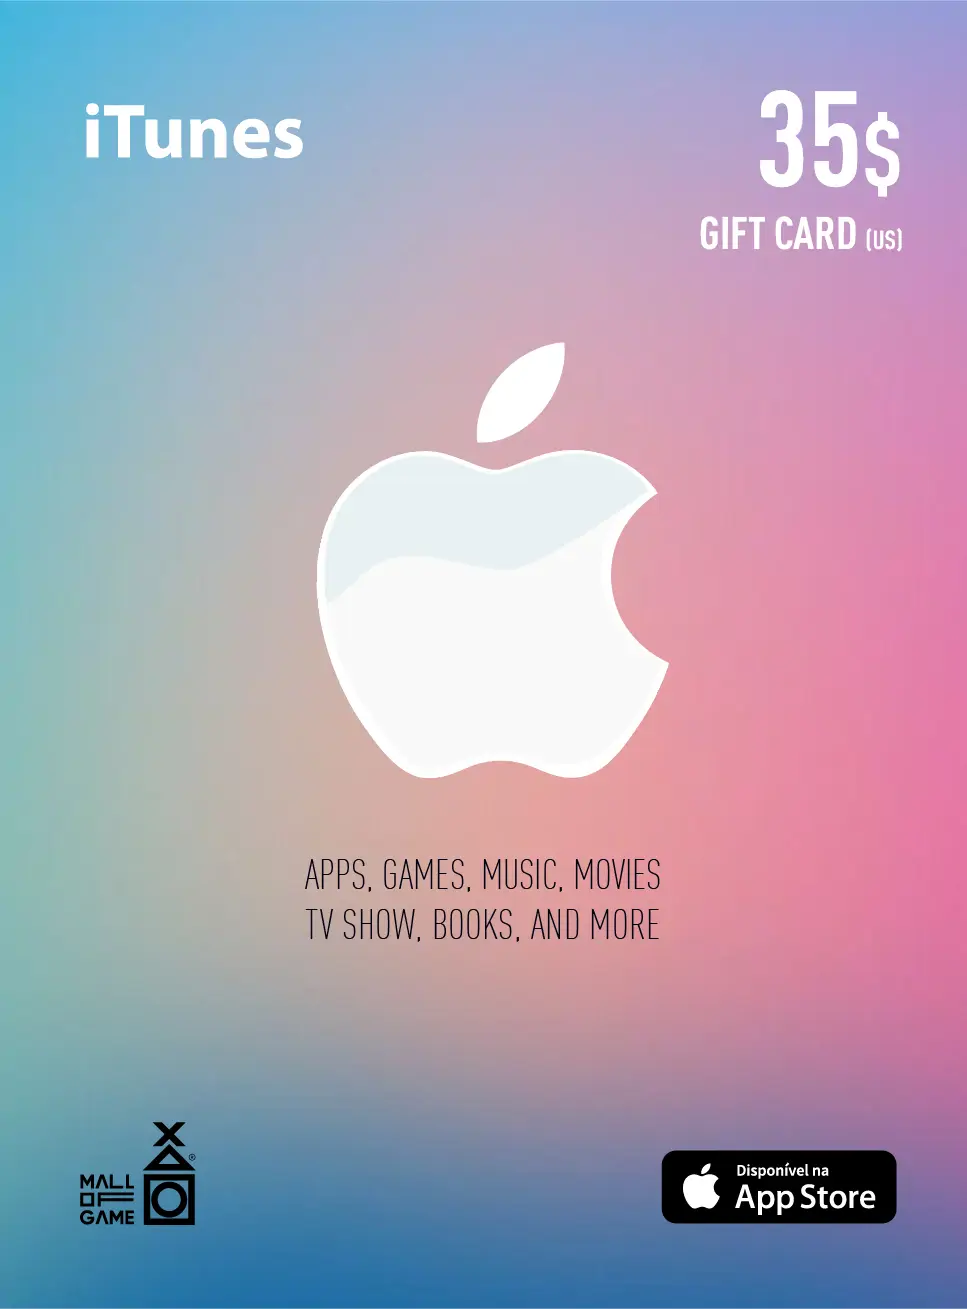  iTunes USD35 Gift Card (US)